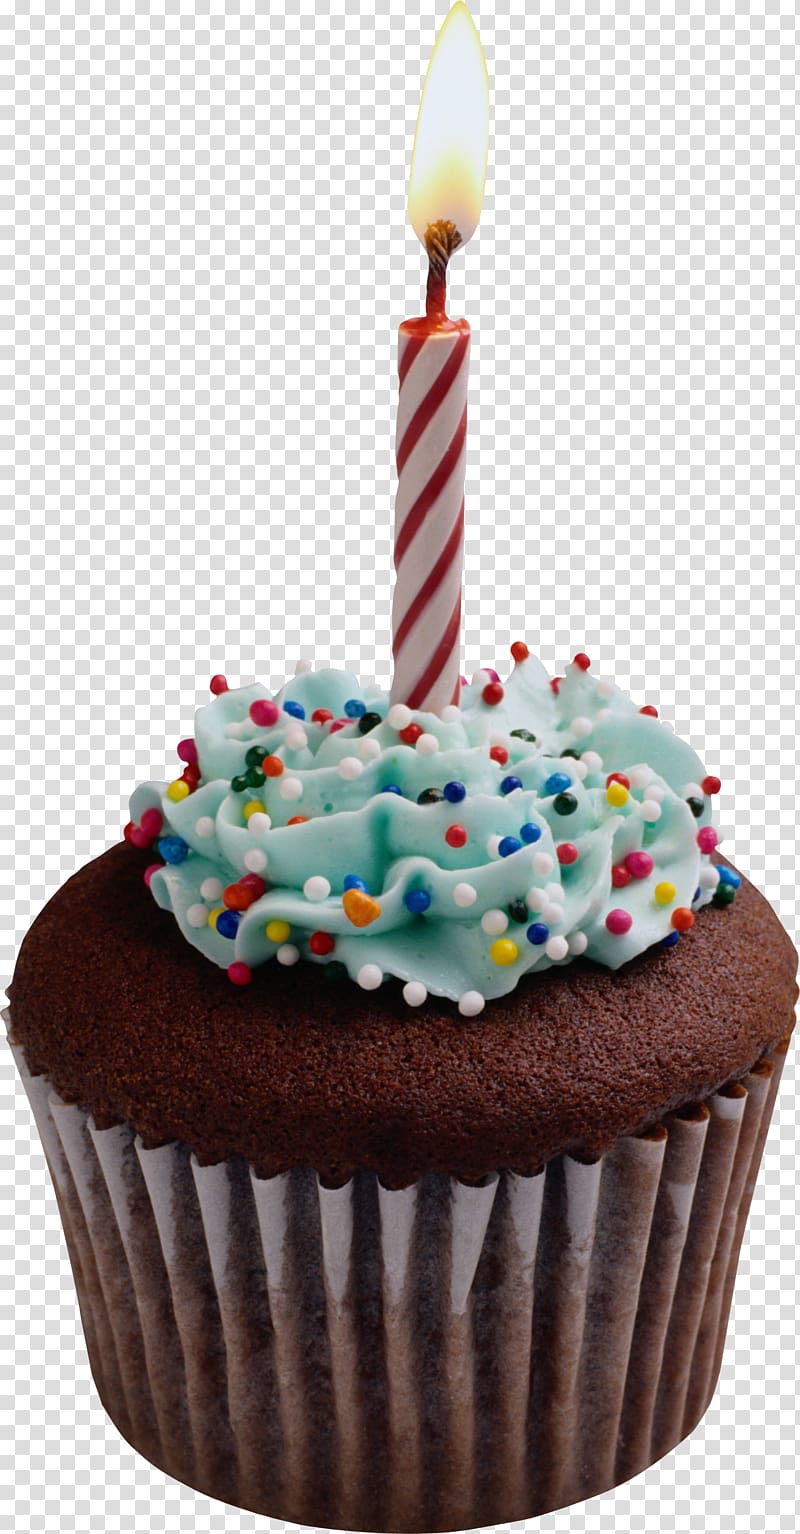 Birthday cake Cupcake Golf course, First birthday transparent background PNG clipart